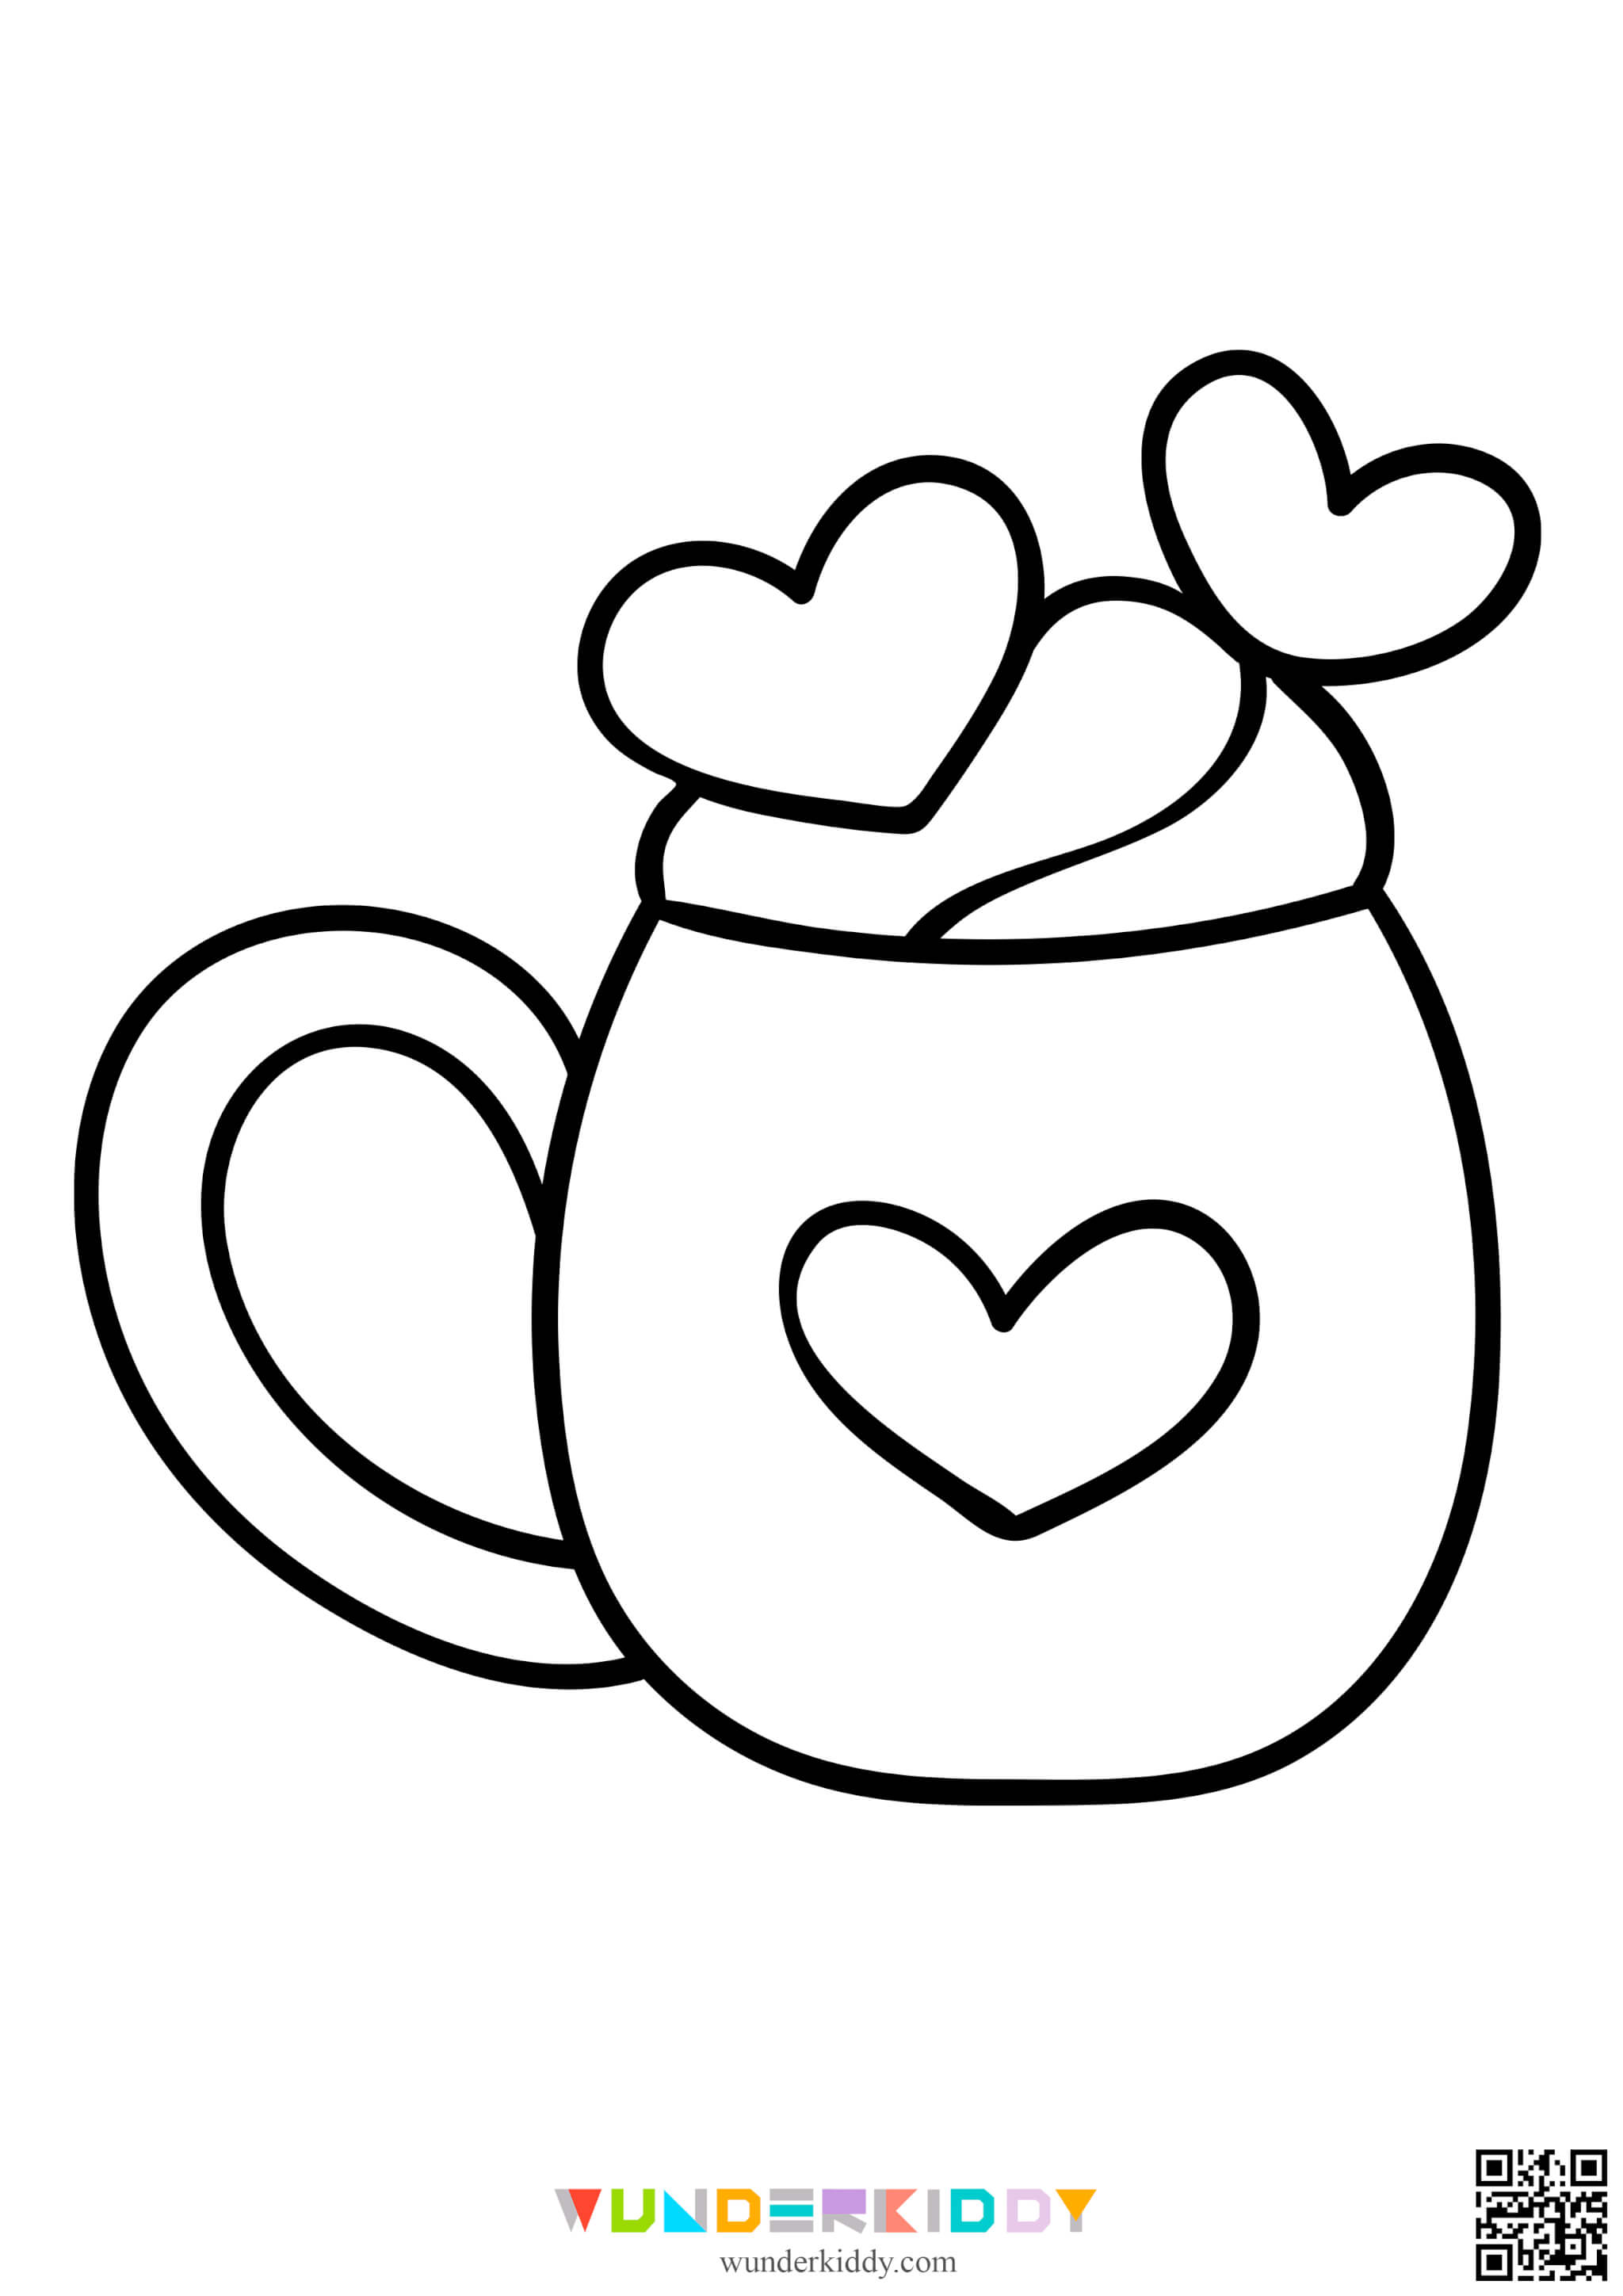 Valentines Coloring Pages - Image 18